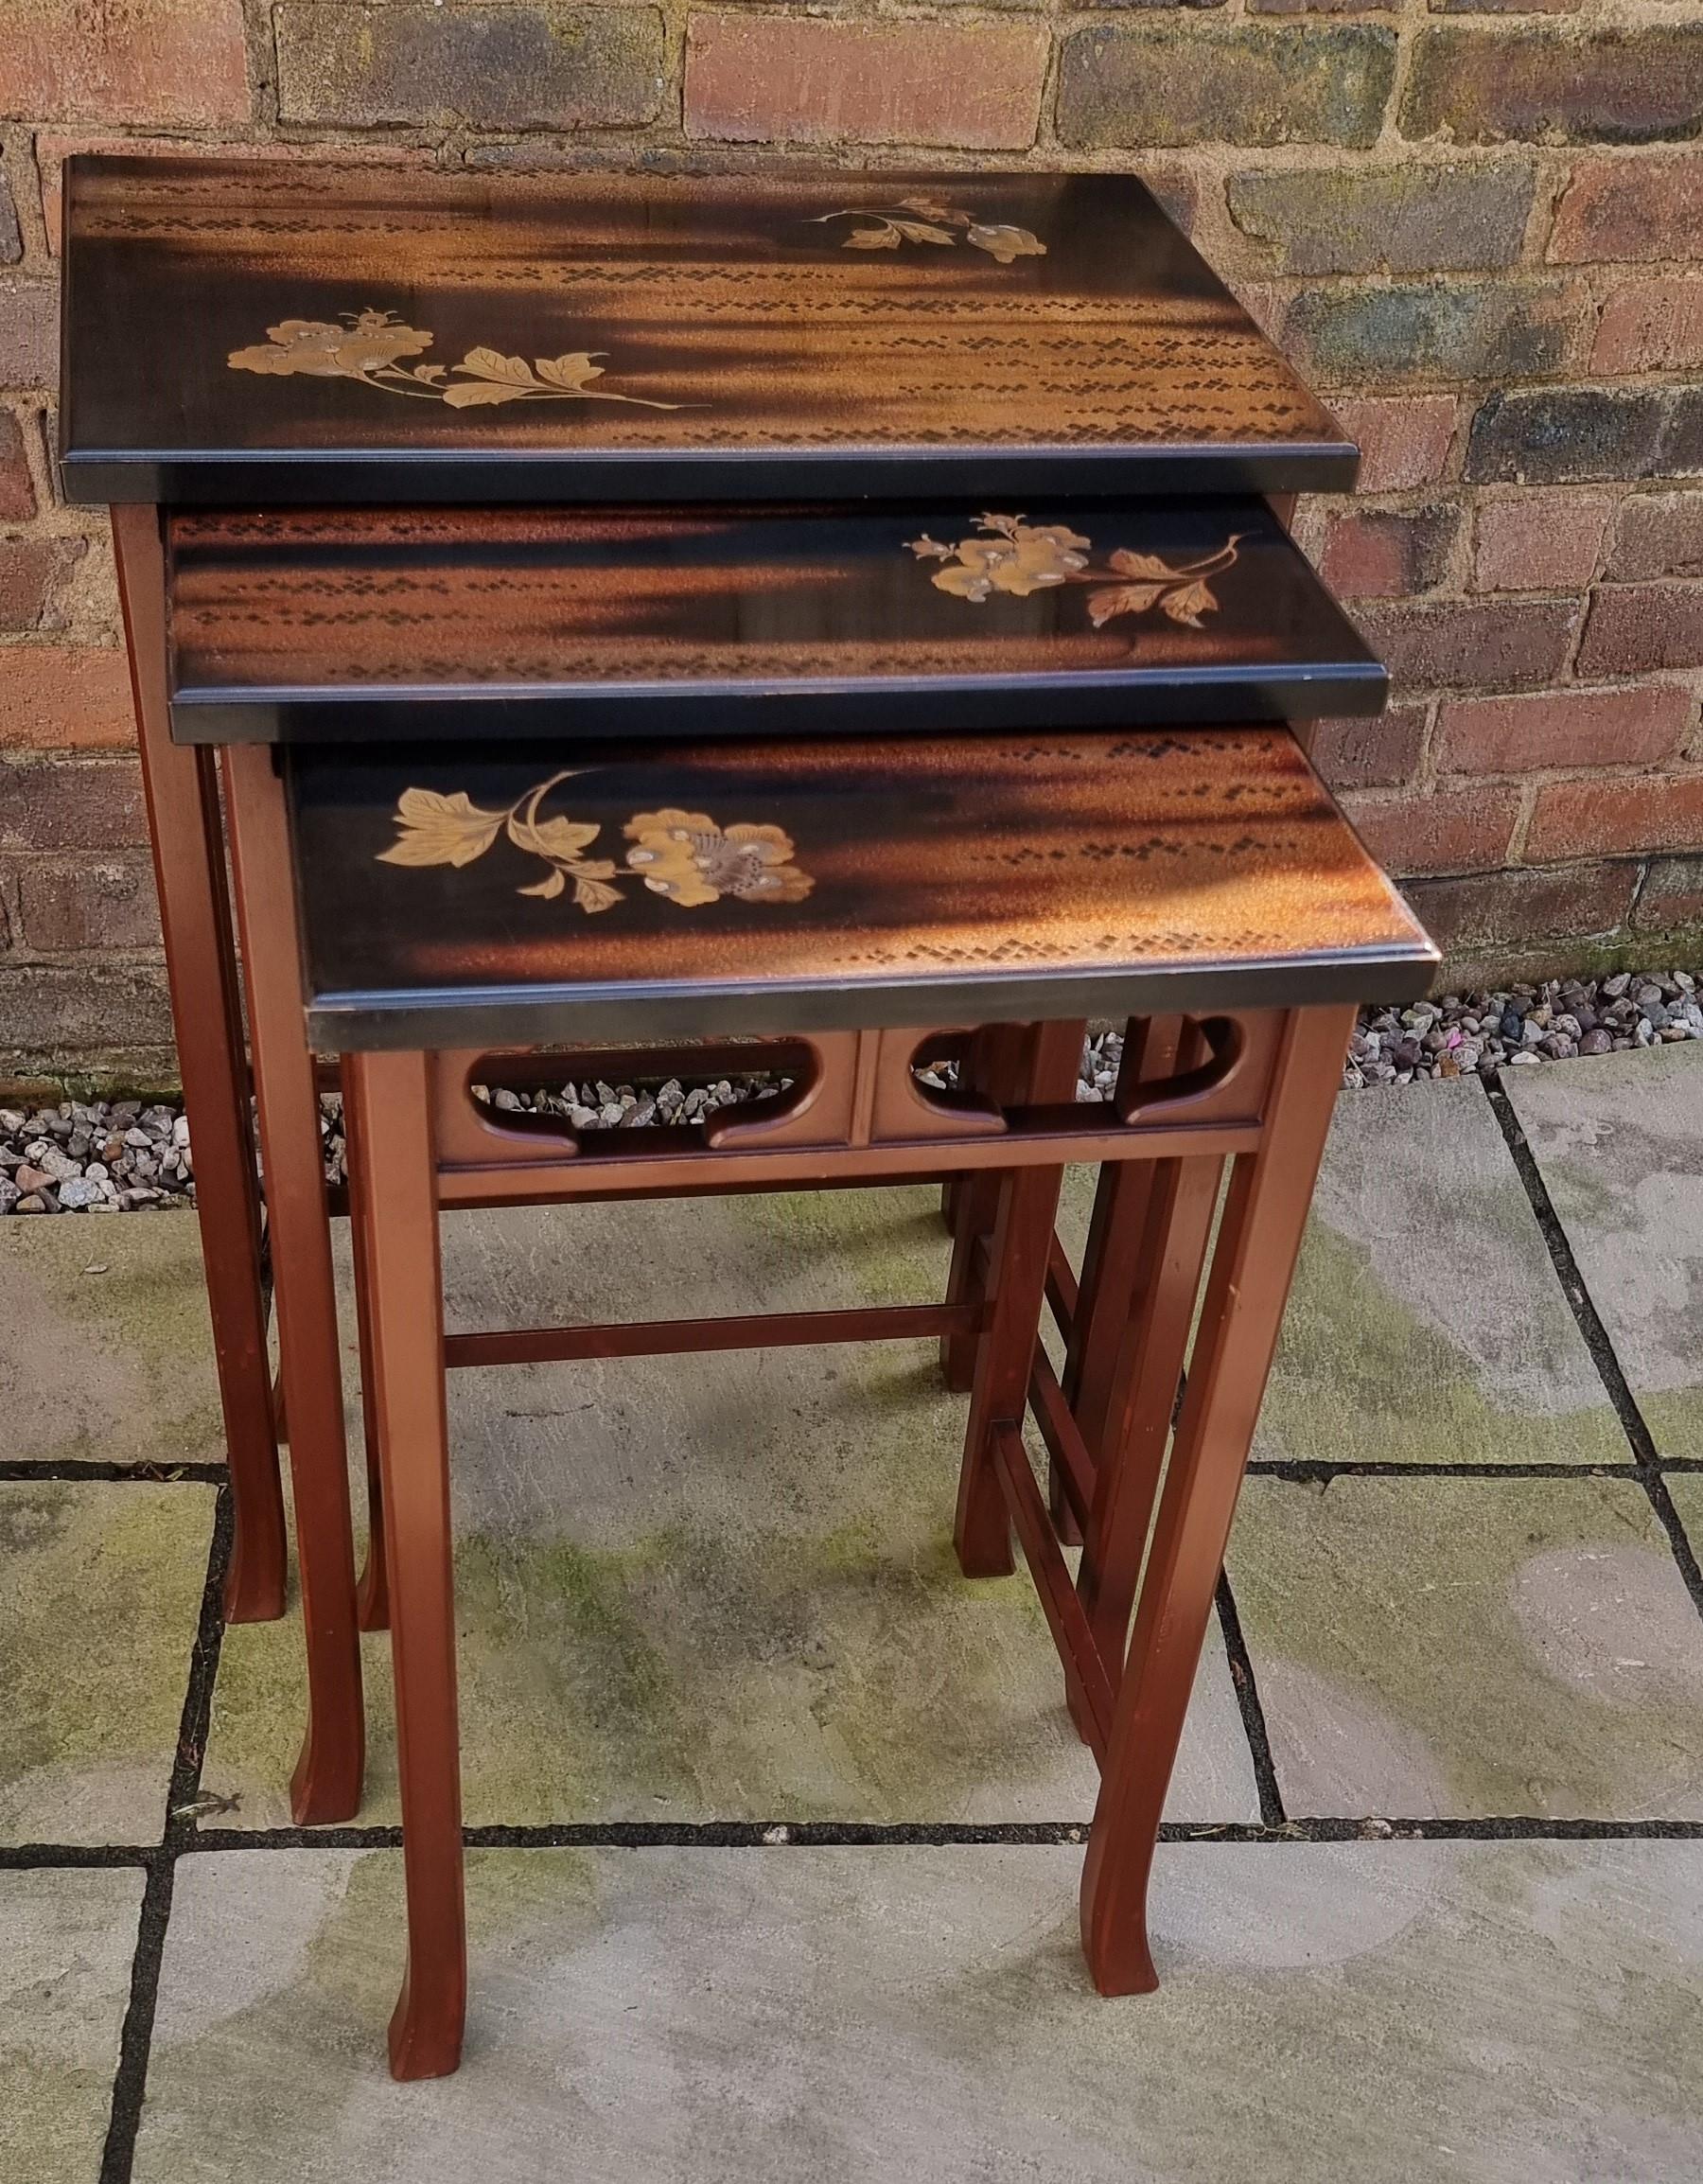 This distinctive and decorative nest of tables was made in Japan and dates to circa 1910. The simple legs and framework are finished in brown lacquer and consist of square legs with turned outfeet connected with plain stretchers both at the top and